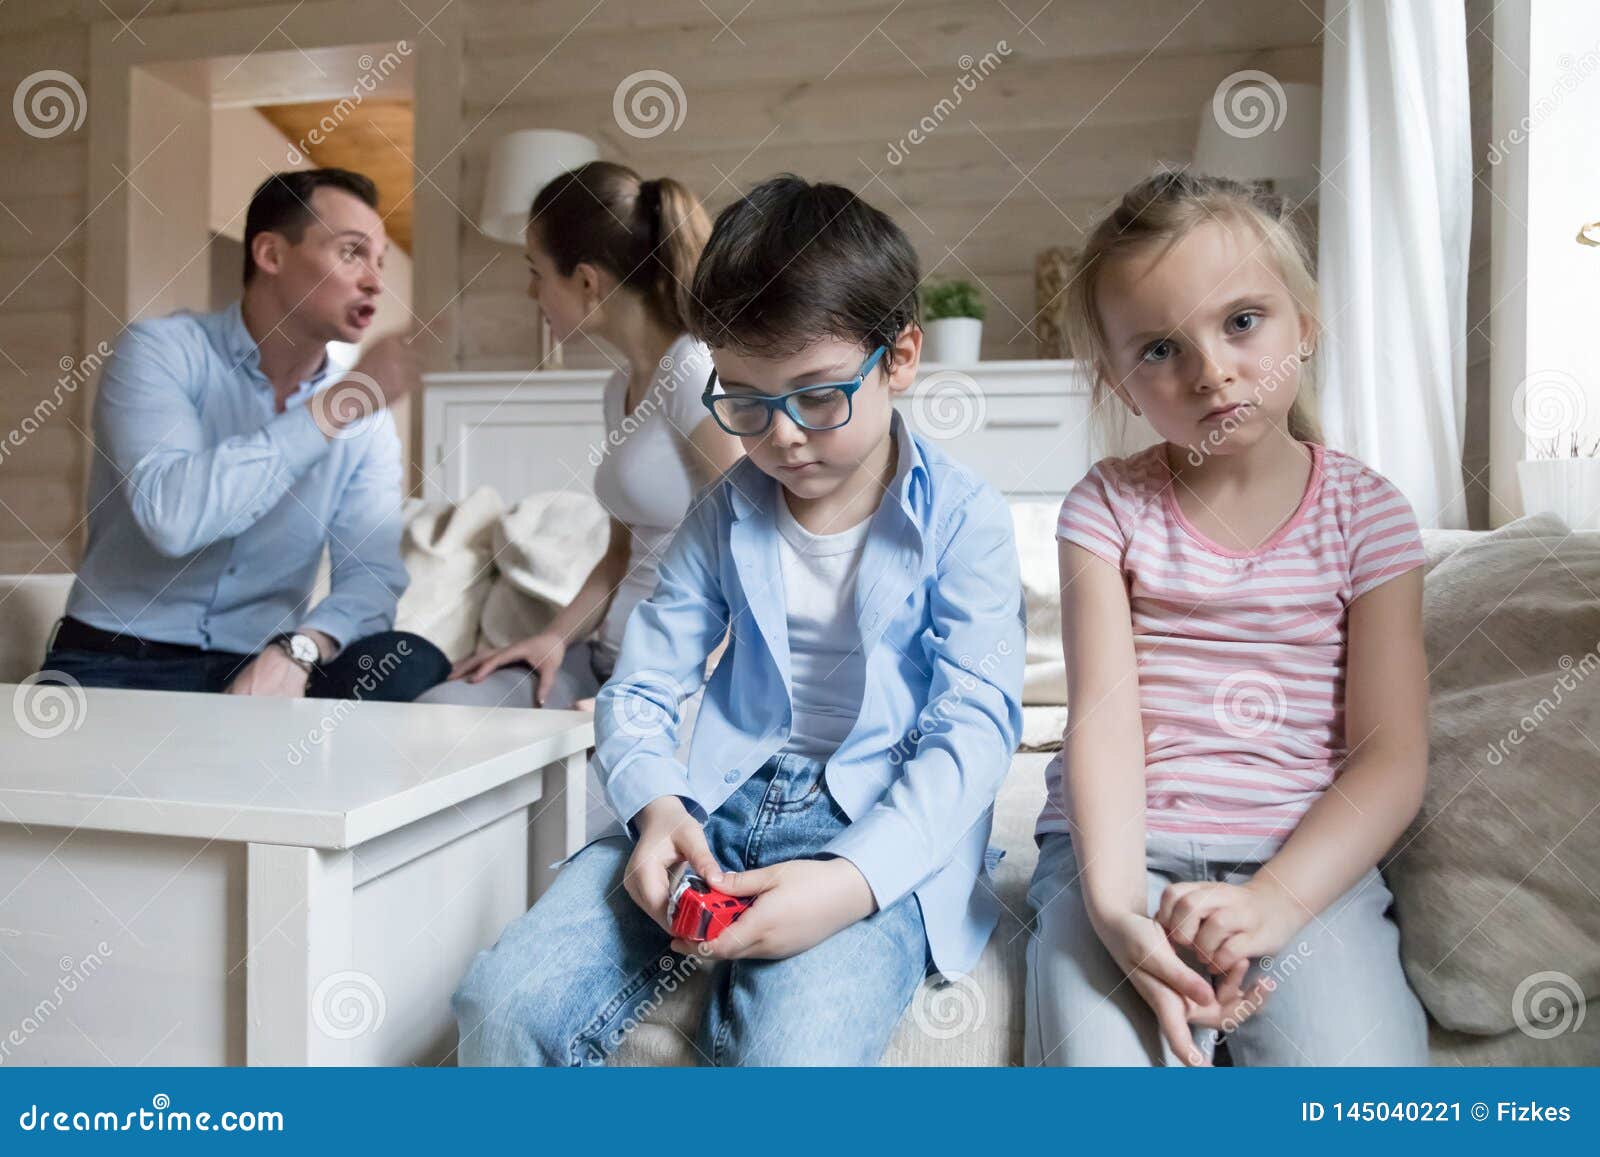 sad children listen parents have angry fight at home headshot